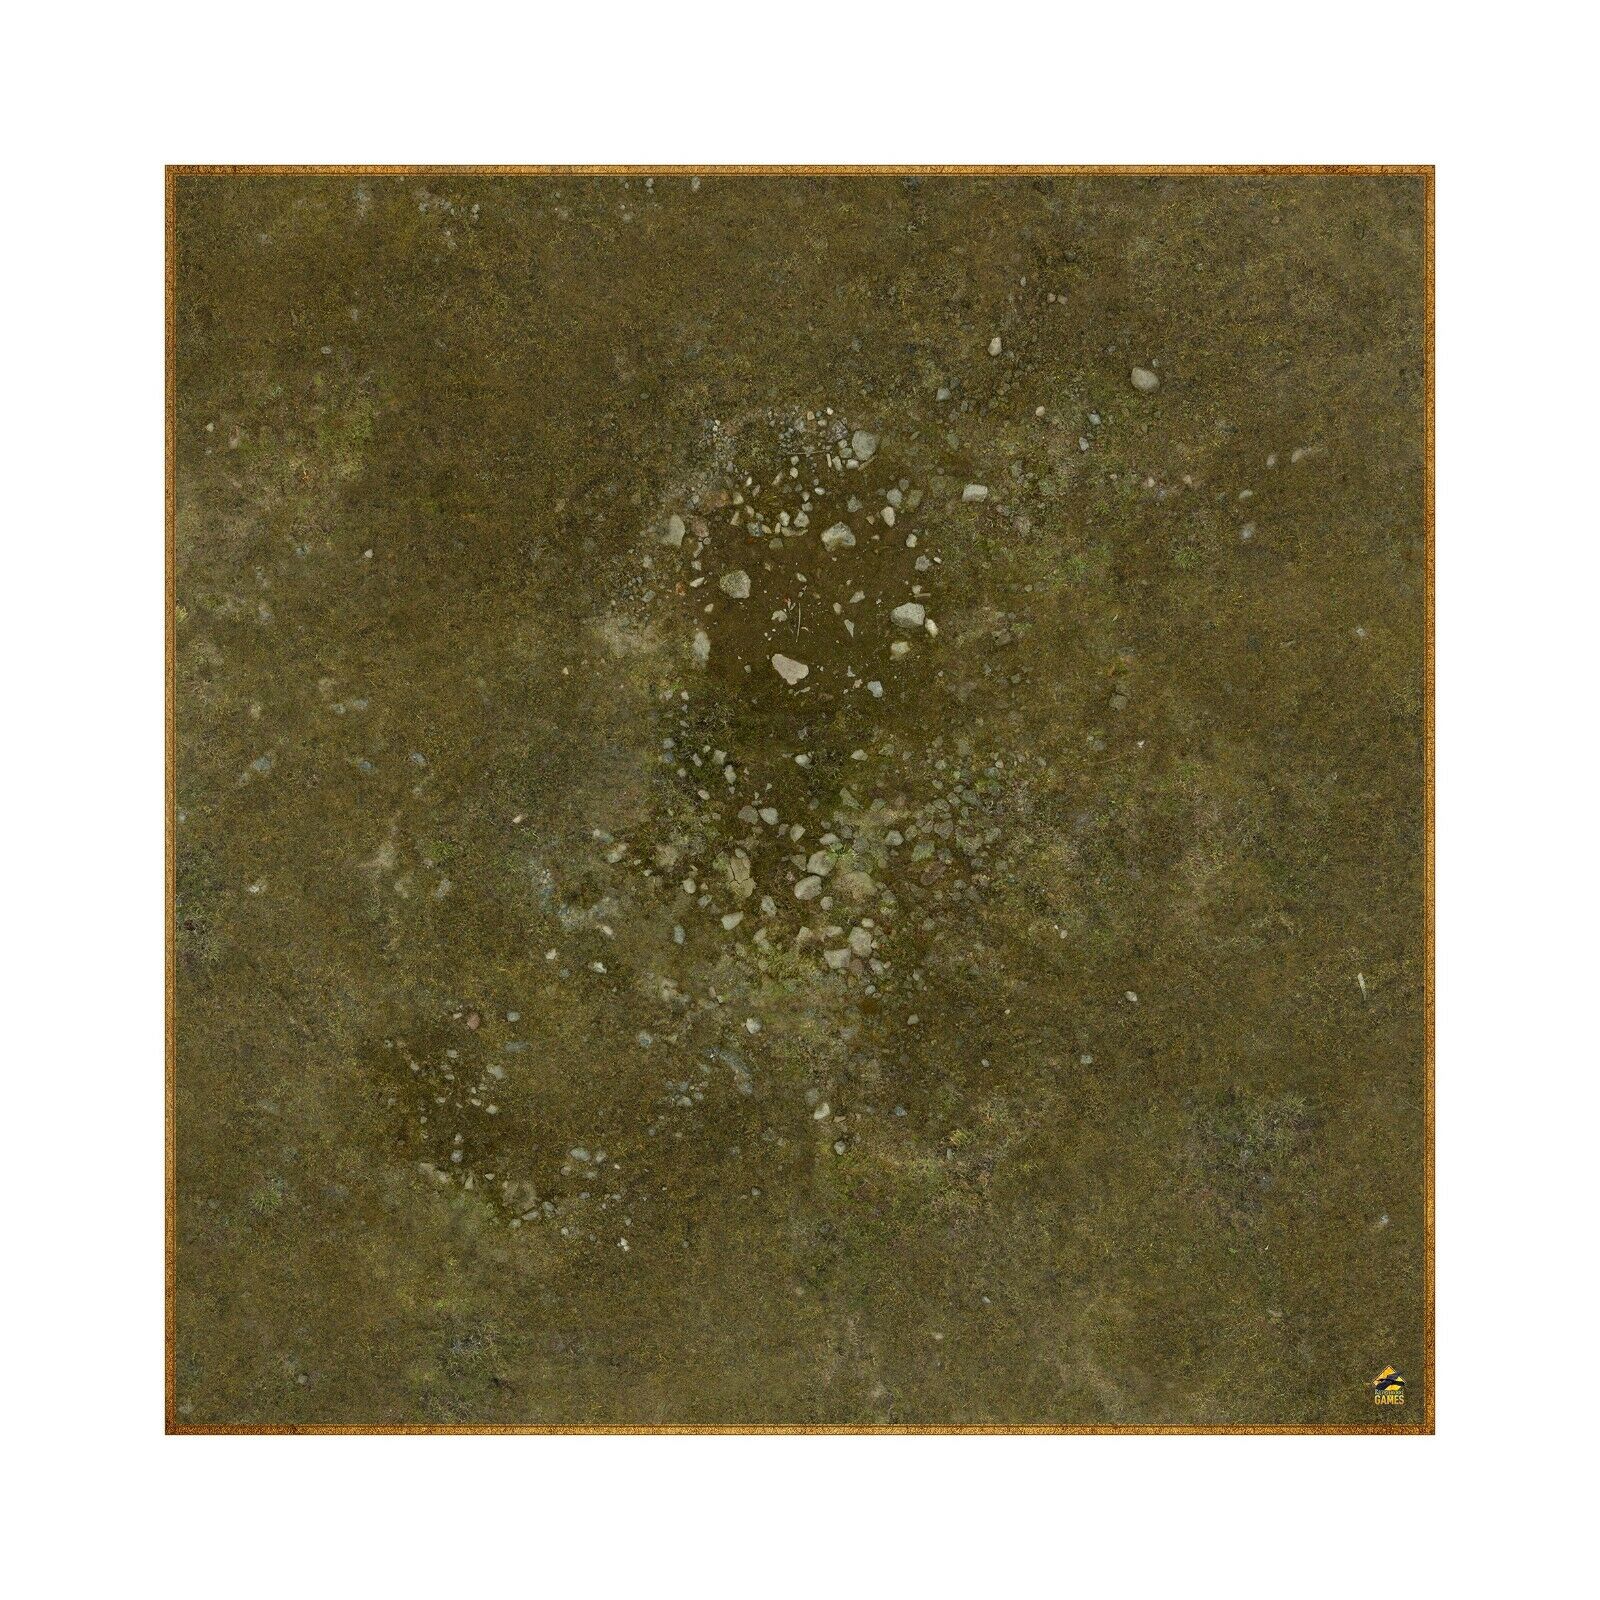 Rocky Field 001 - 36" x 36" Battle Mat for Table Top RPGs, Dungeons and Dragons, Pathfinder Etc.